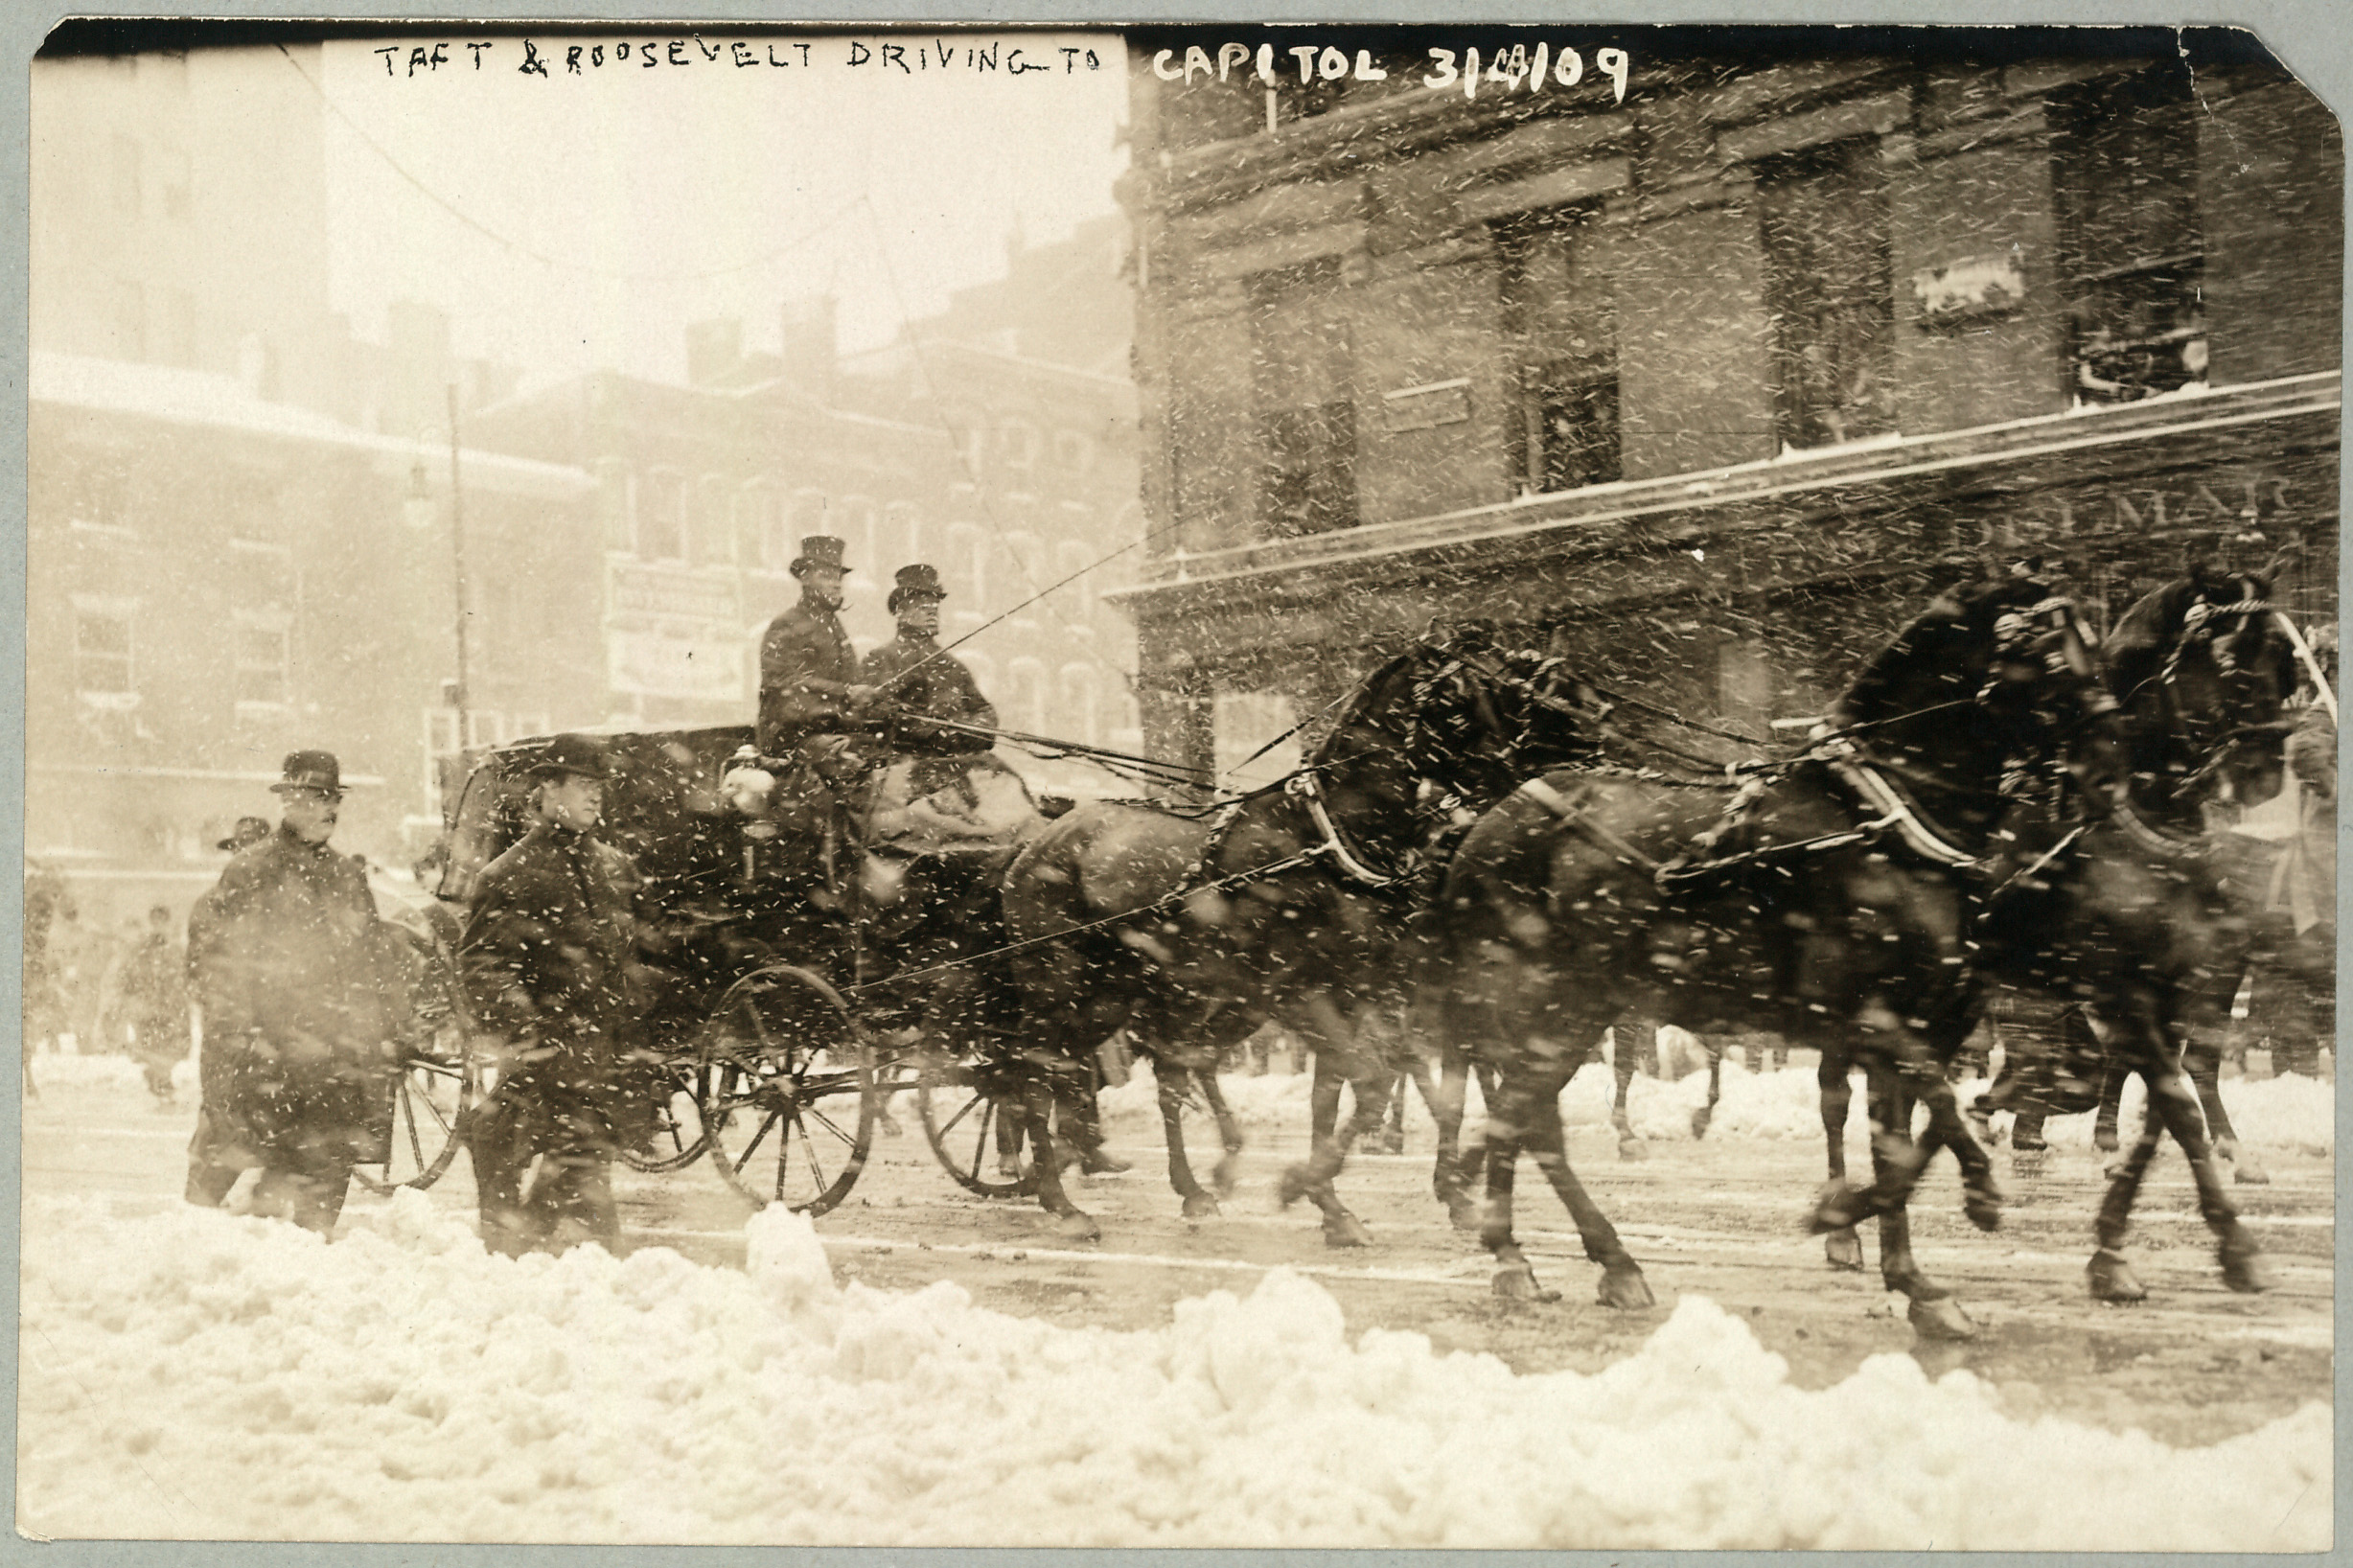 PHOTO: On their way to his inauguration, President-elect William Howard Taft and outgoing President Theodore Roosevelt ride in a carriage along the snowy streets towards the US Capitol in Washington D.C., March 4, 1909.